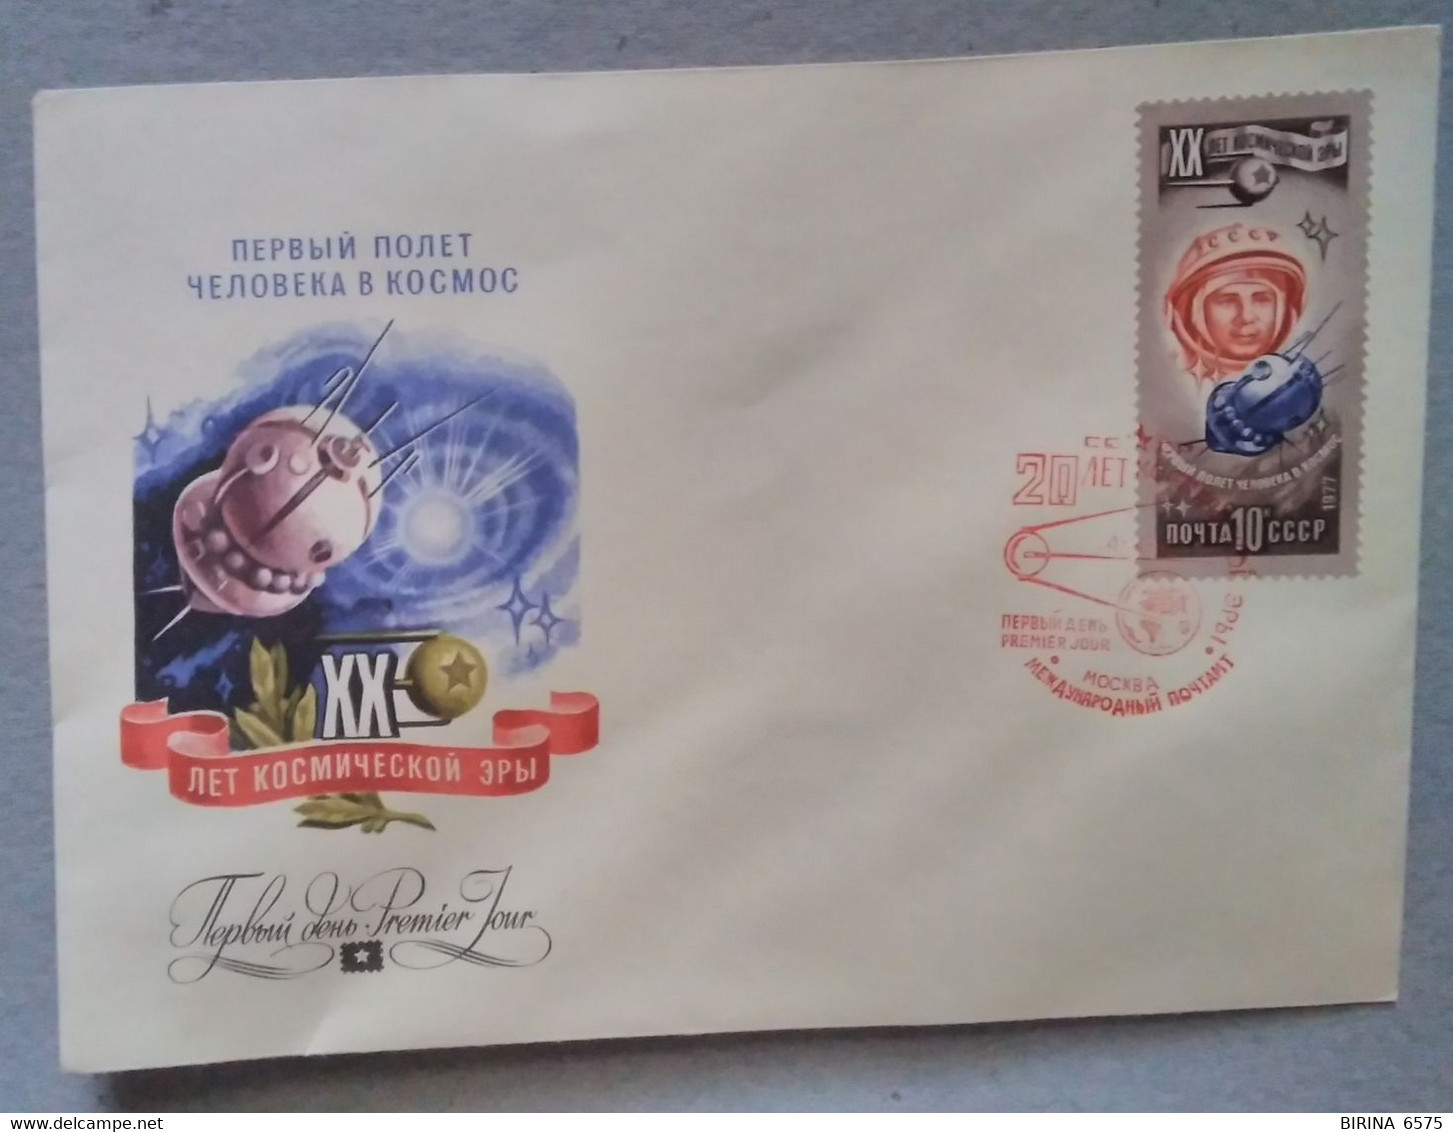 Astronautics. Cosmos. First Day. 1977. Stamp. Postal Envelope. Special Cancellation. ХХ Years Of The Space Age The USSR. - Verzamelingen